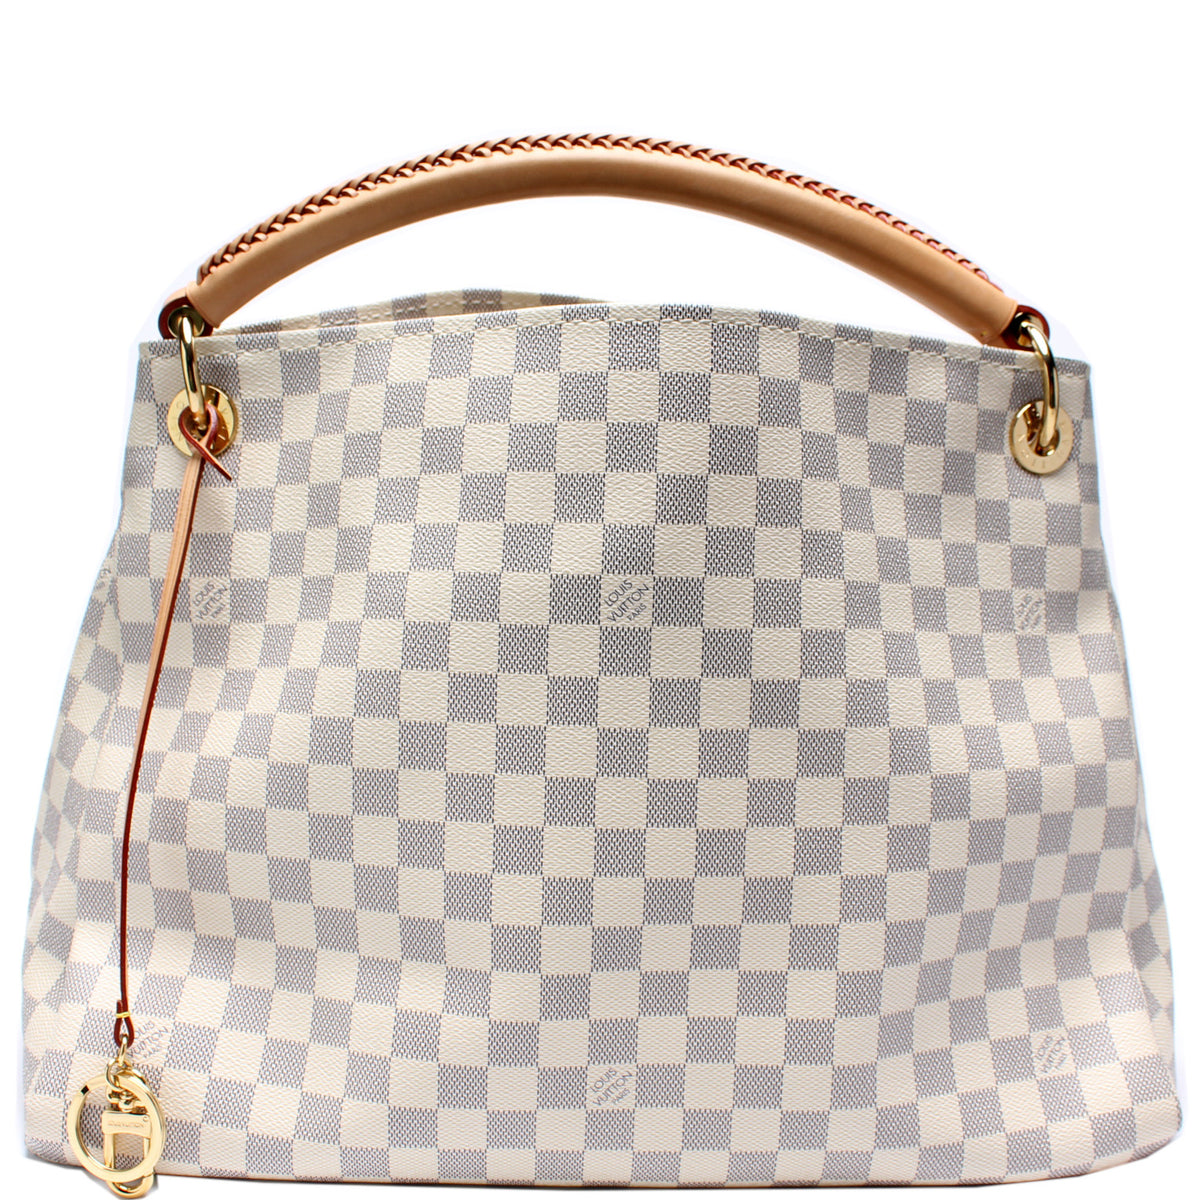 Louis Vuitton - Authenticated Artsy Handbag - Leather White for Women, Very Good Condition